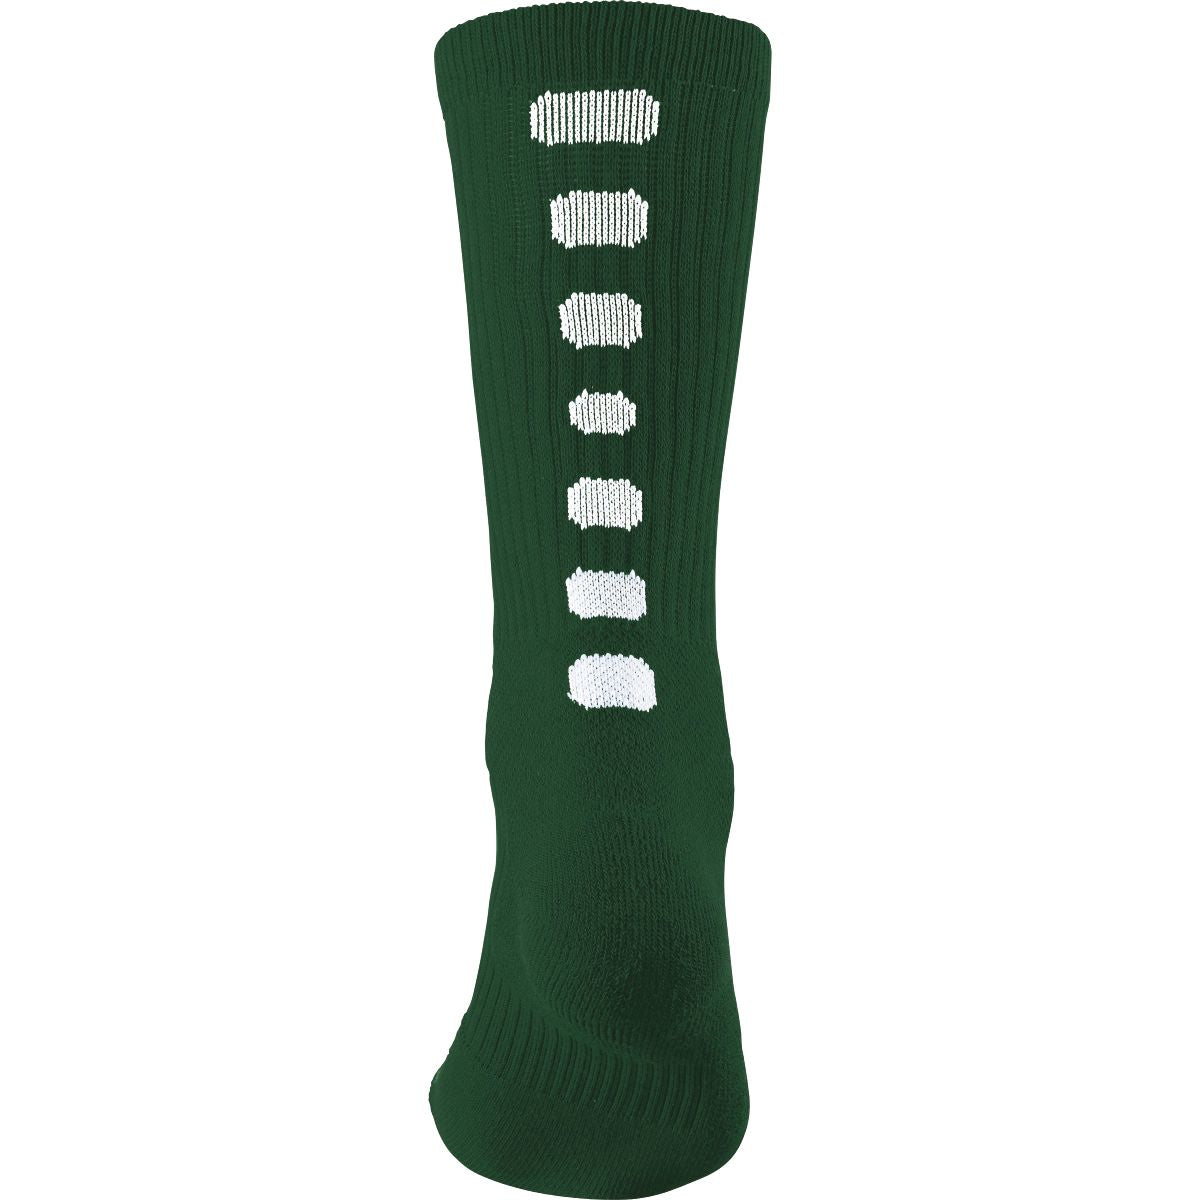 Augusta Sportswear Color Block Crew Sock in Forest/White  -Part of the Adult, Augusta-Products, Accessories-Socks product lines at KanaleyCreations.com